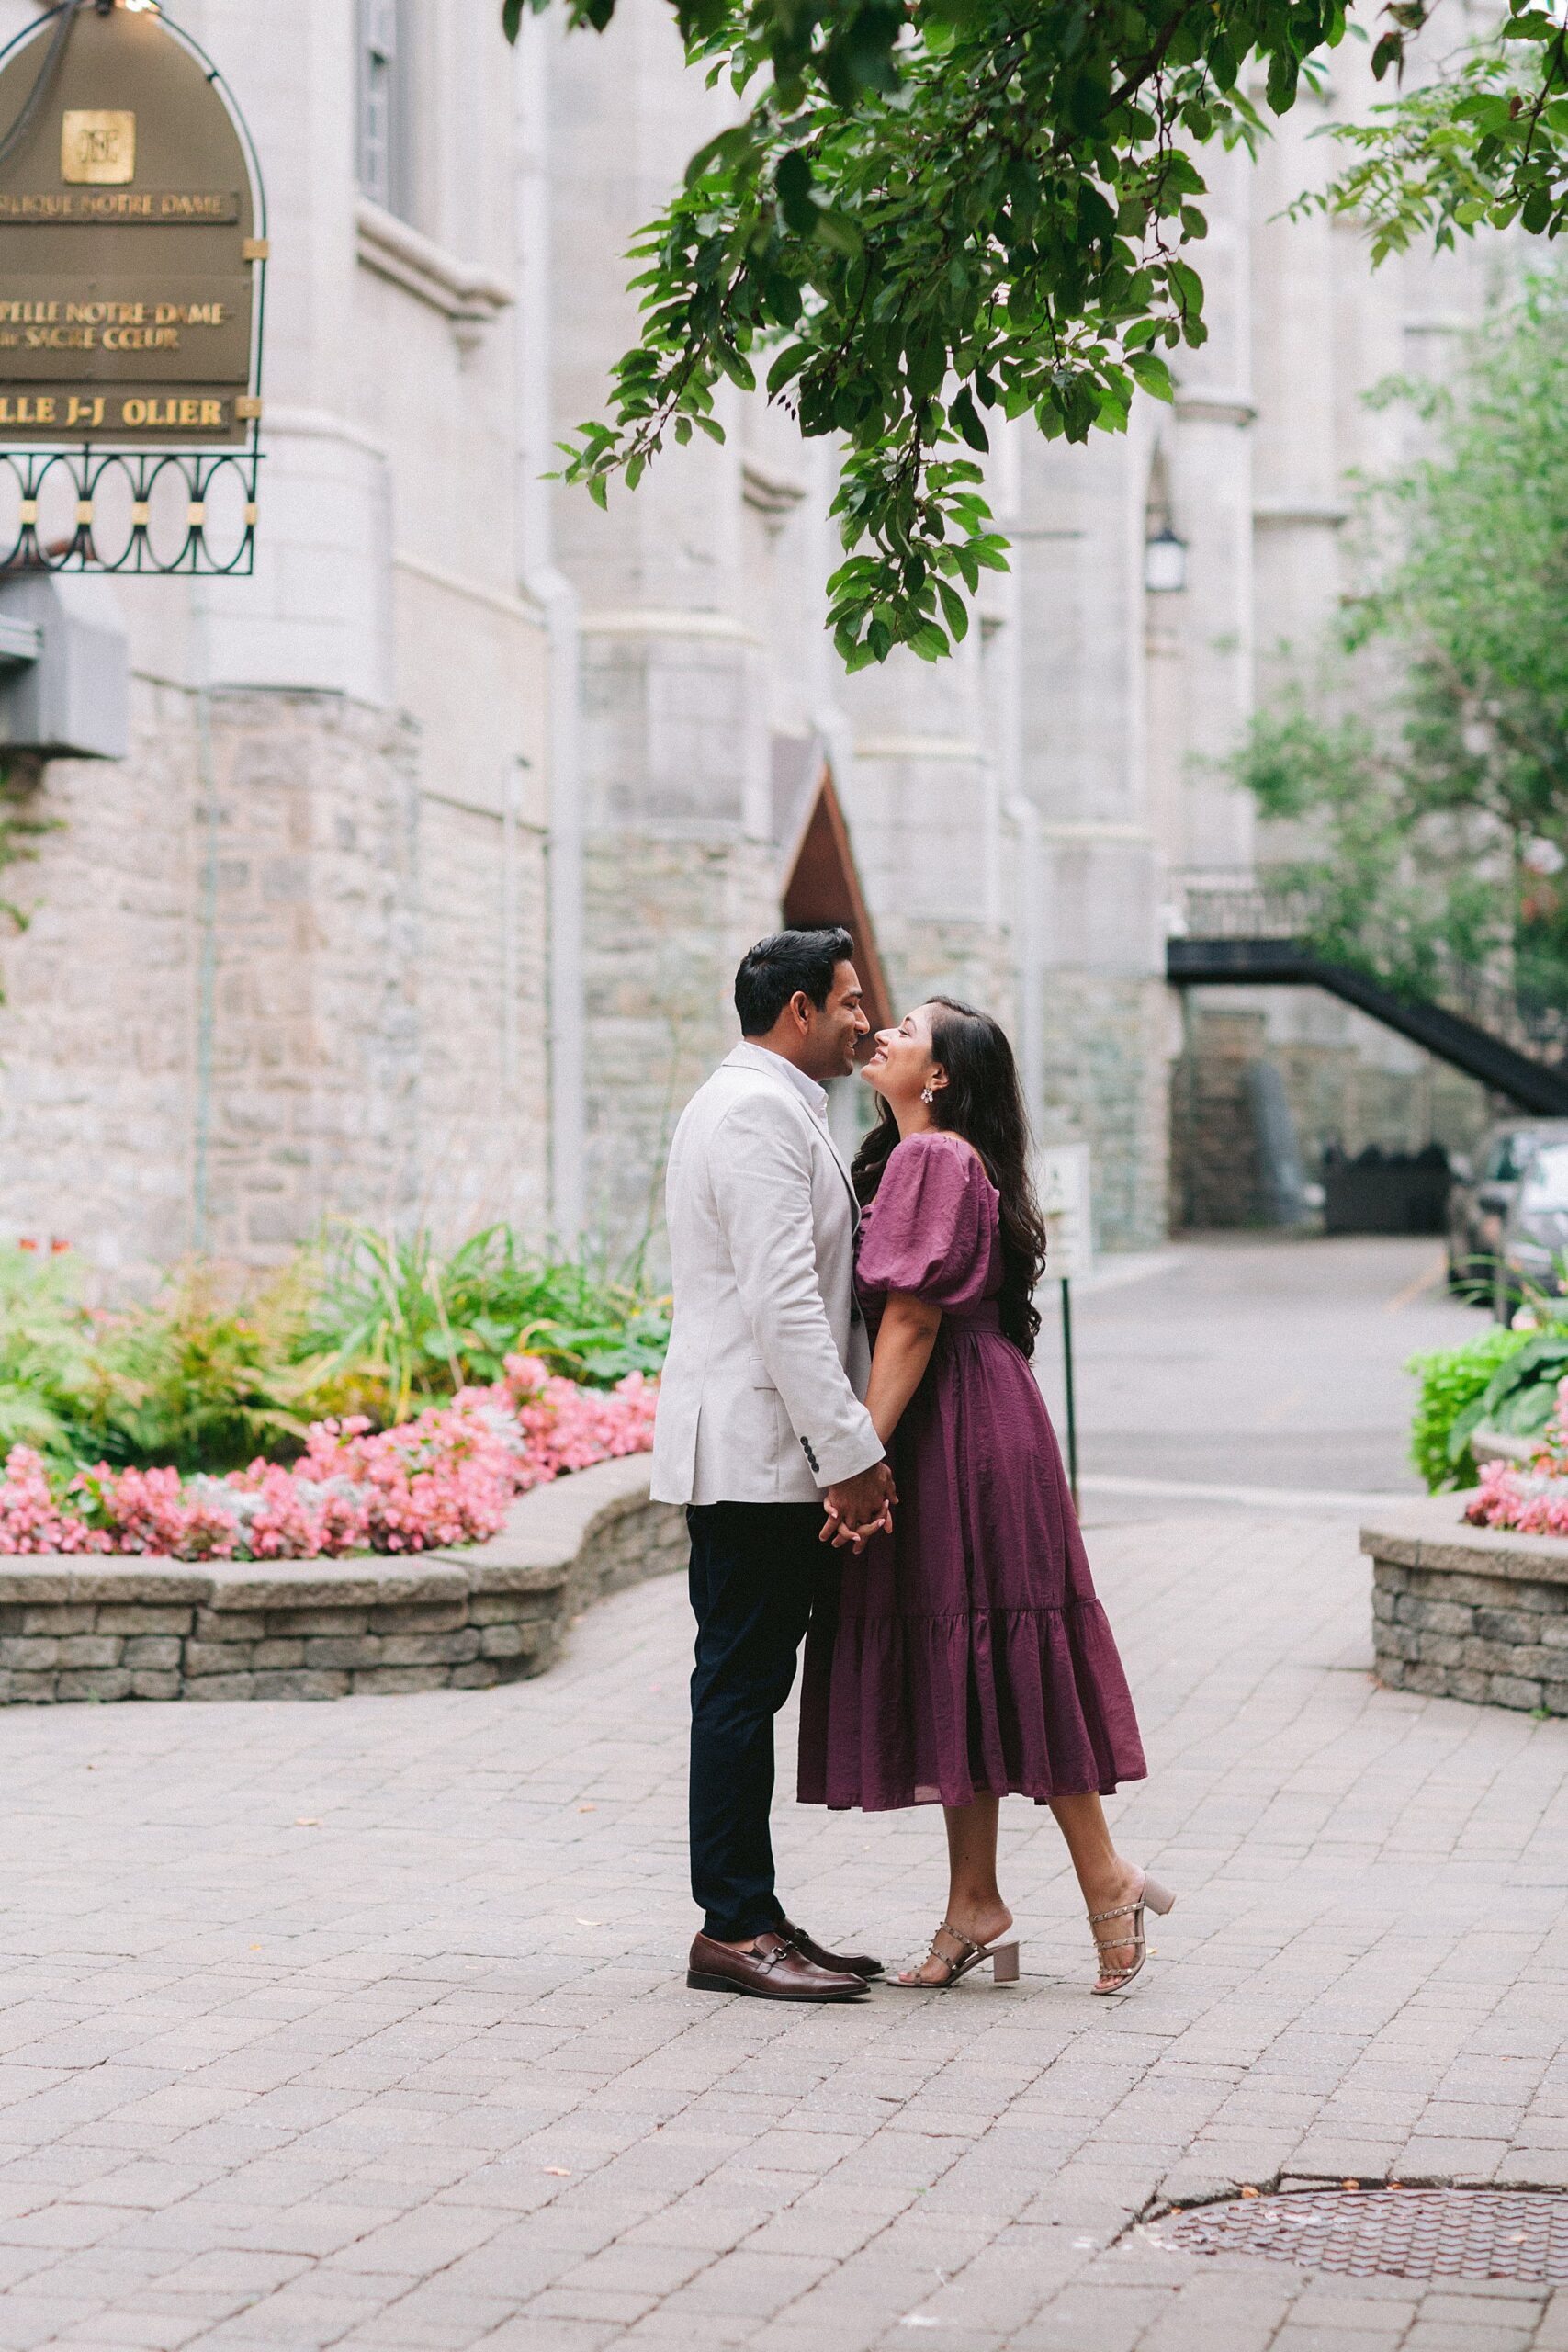 Captured moments of their love story in Montreal's streets